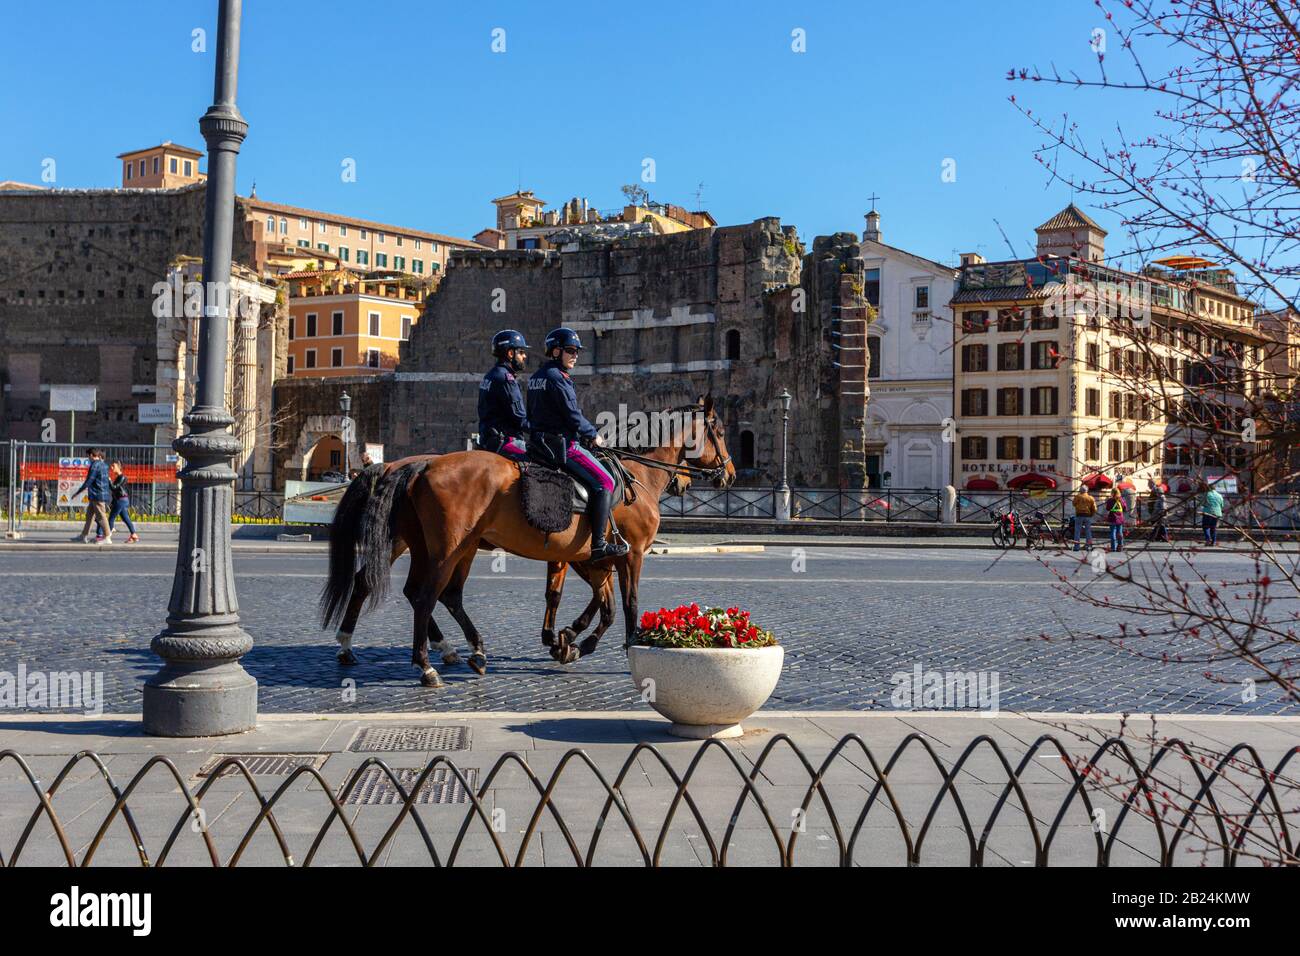 February 22, 2019, Rome. Police on horseback control the order. street near the Coliseum in Italy Stock Photo